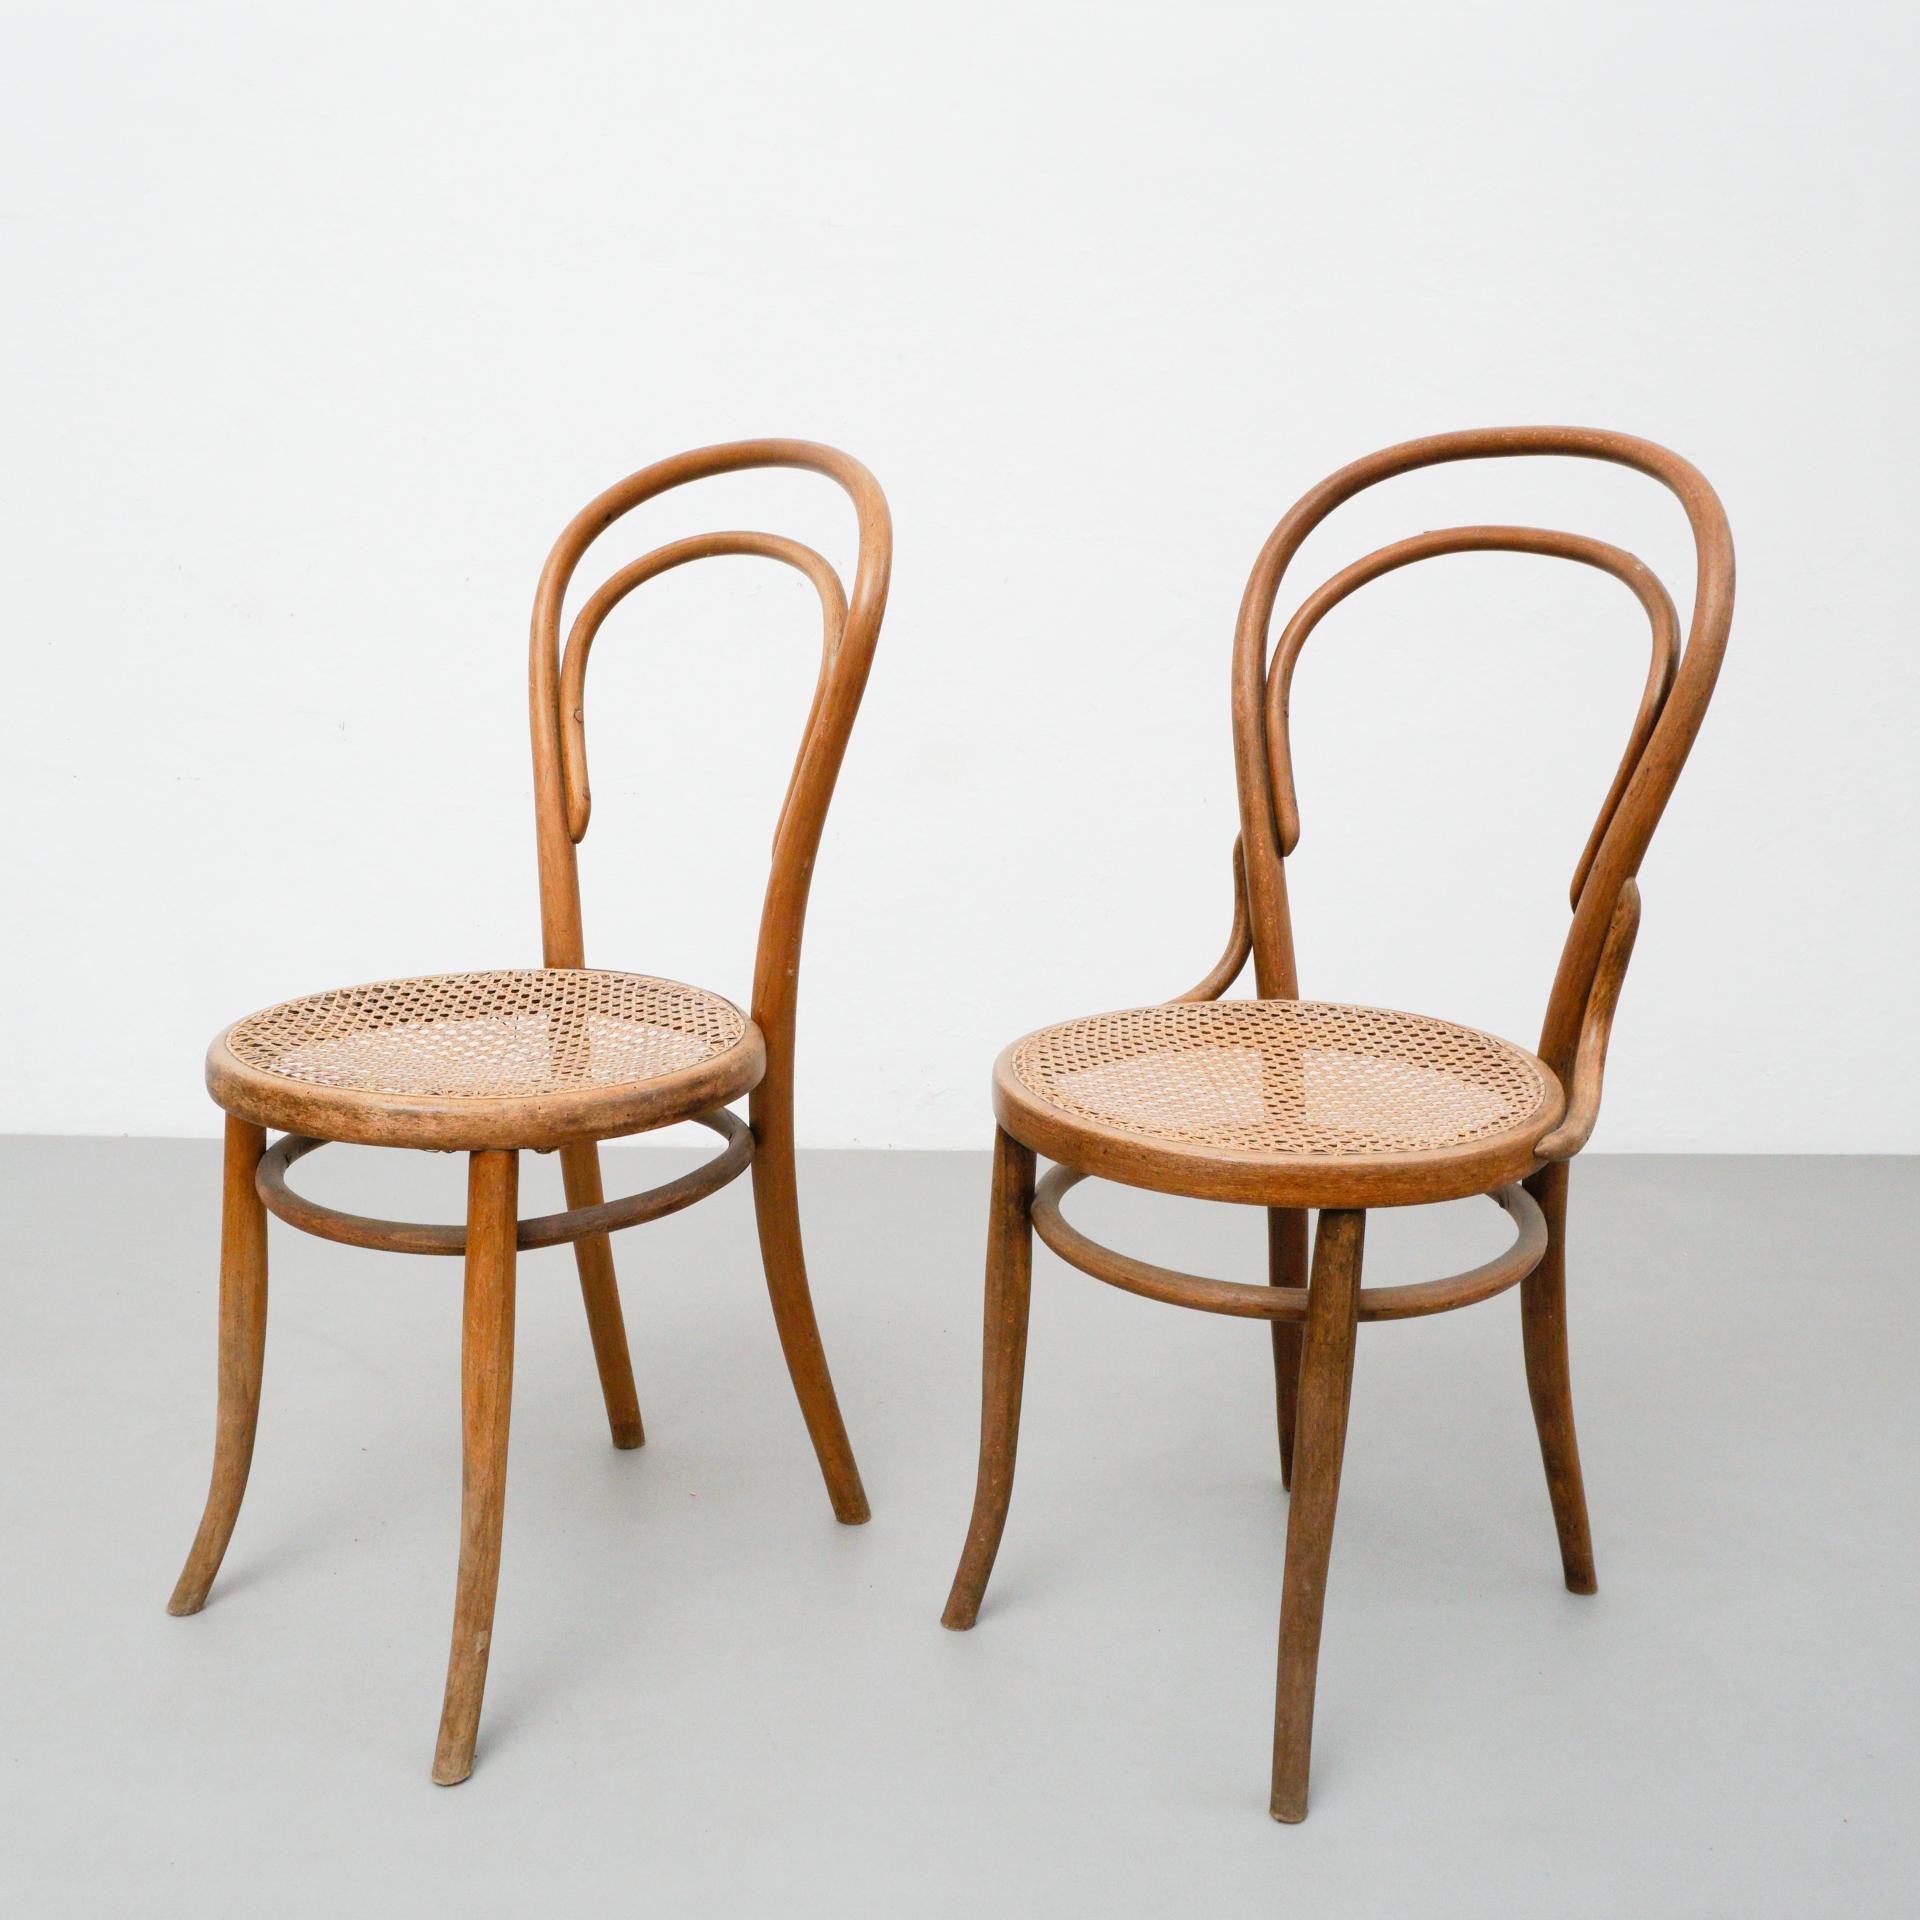 Mid-Century Modern Pair of Chairs in the Style of Thonet by Unknown Designer, circa 1930